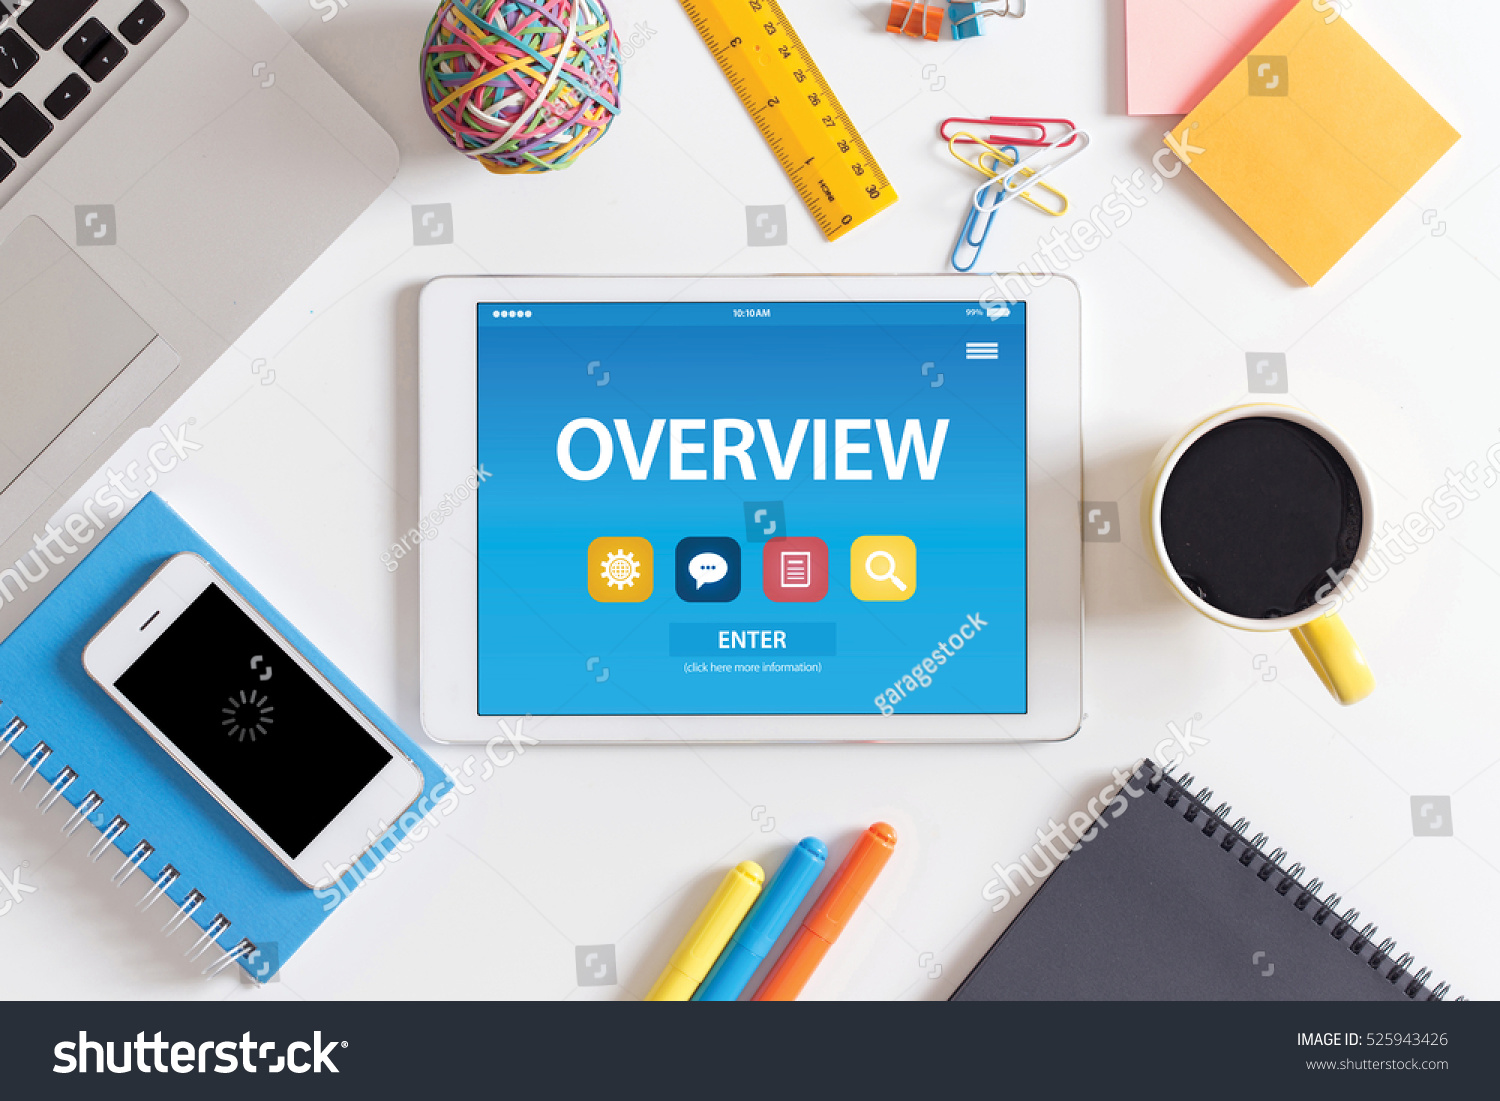 OVERVIEW CONCEPT ON TABLET PC SCREEN #525943426